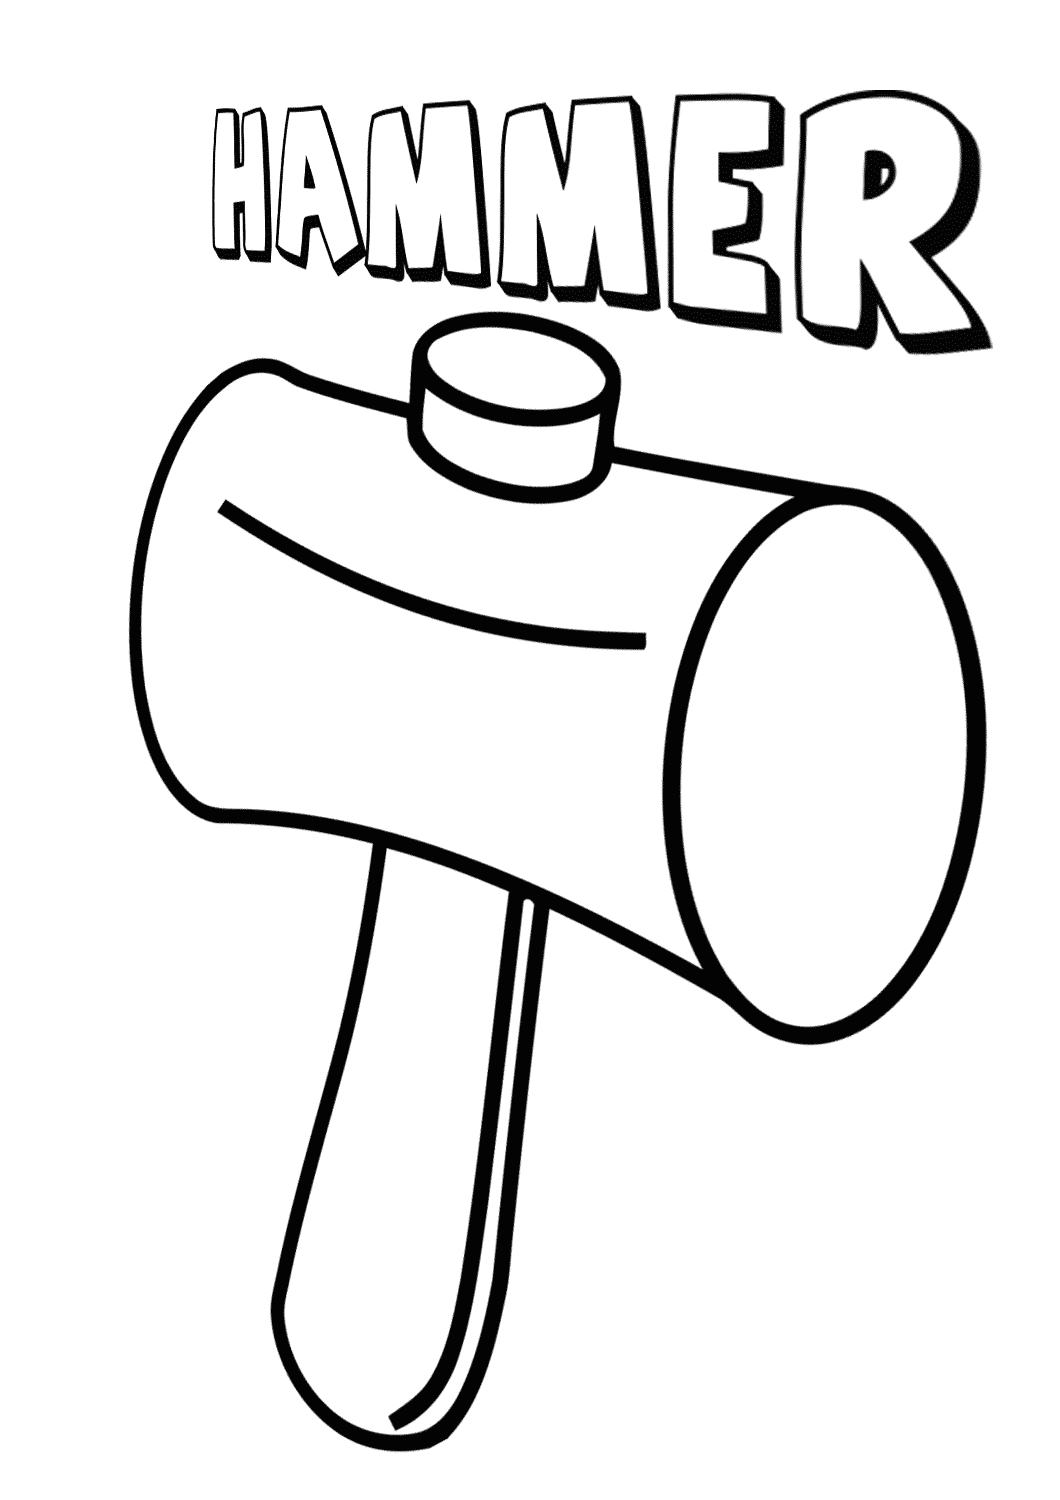 Hammer coloring pages | Coloring pages to download and print